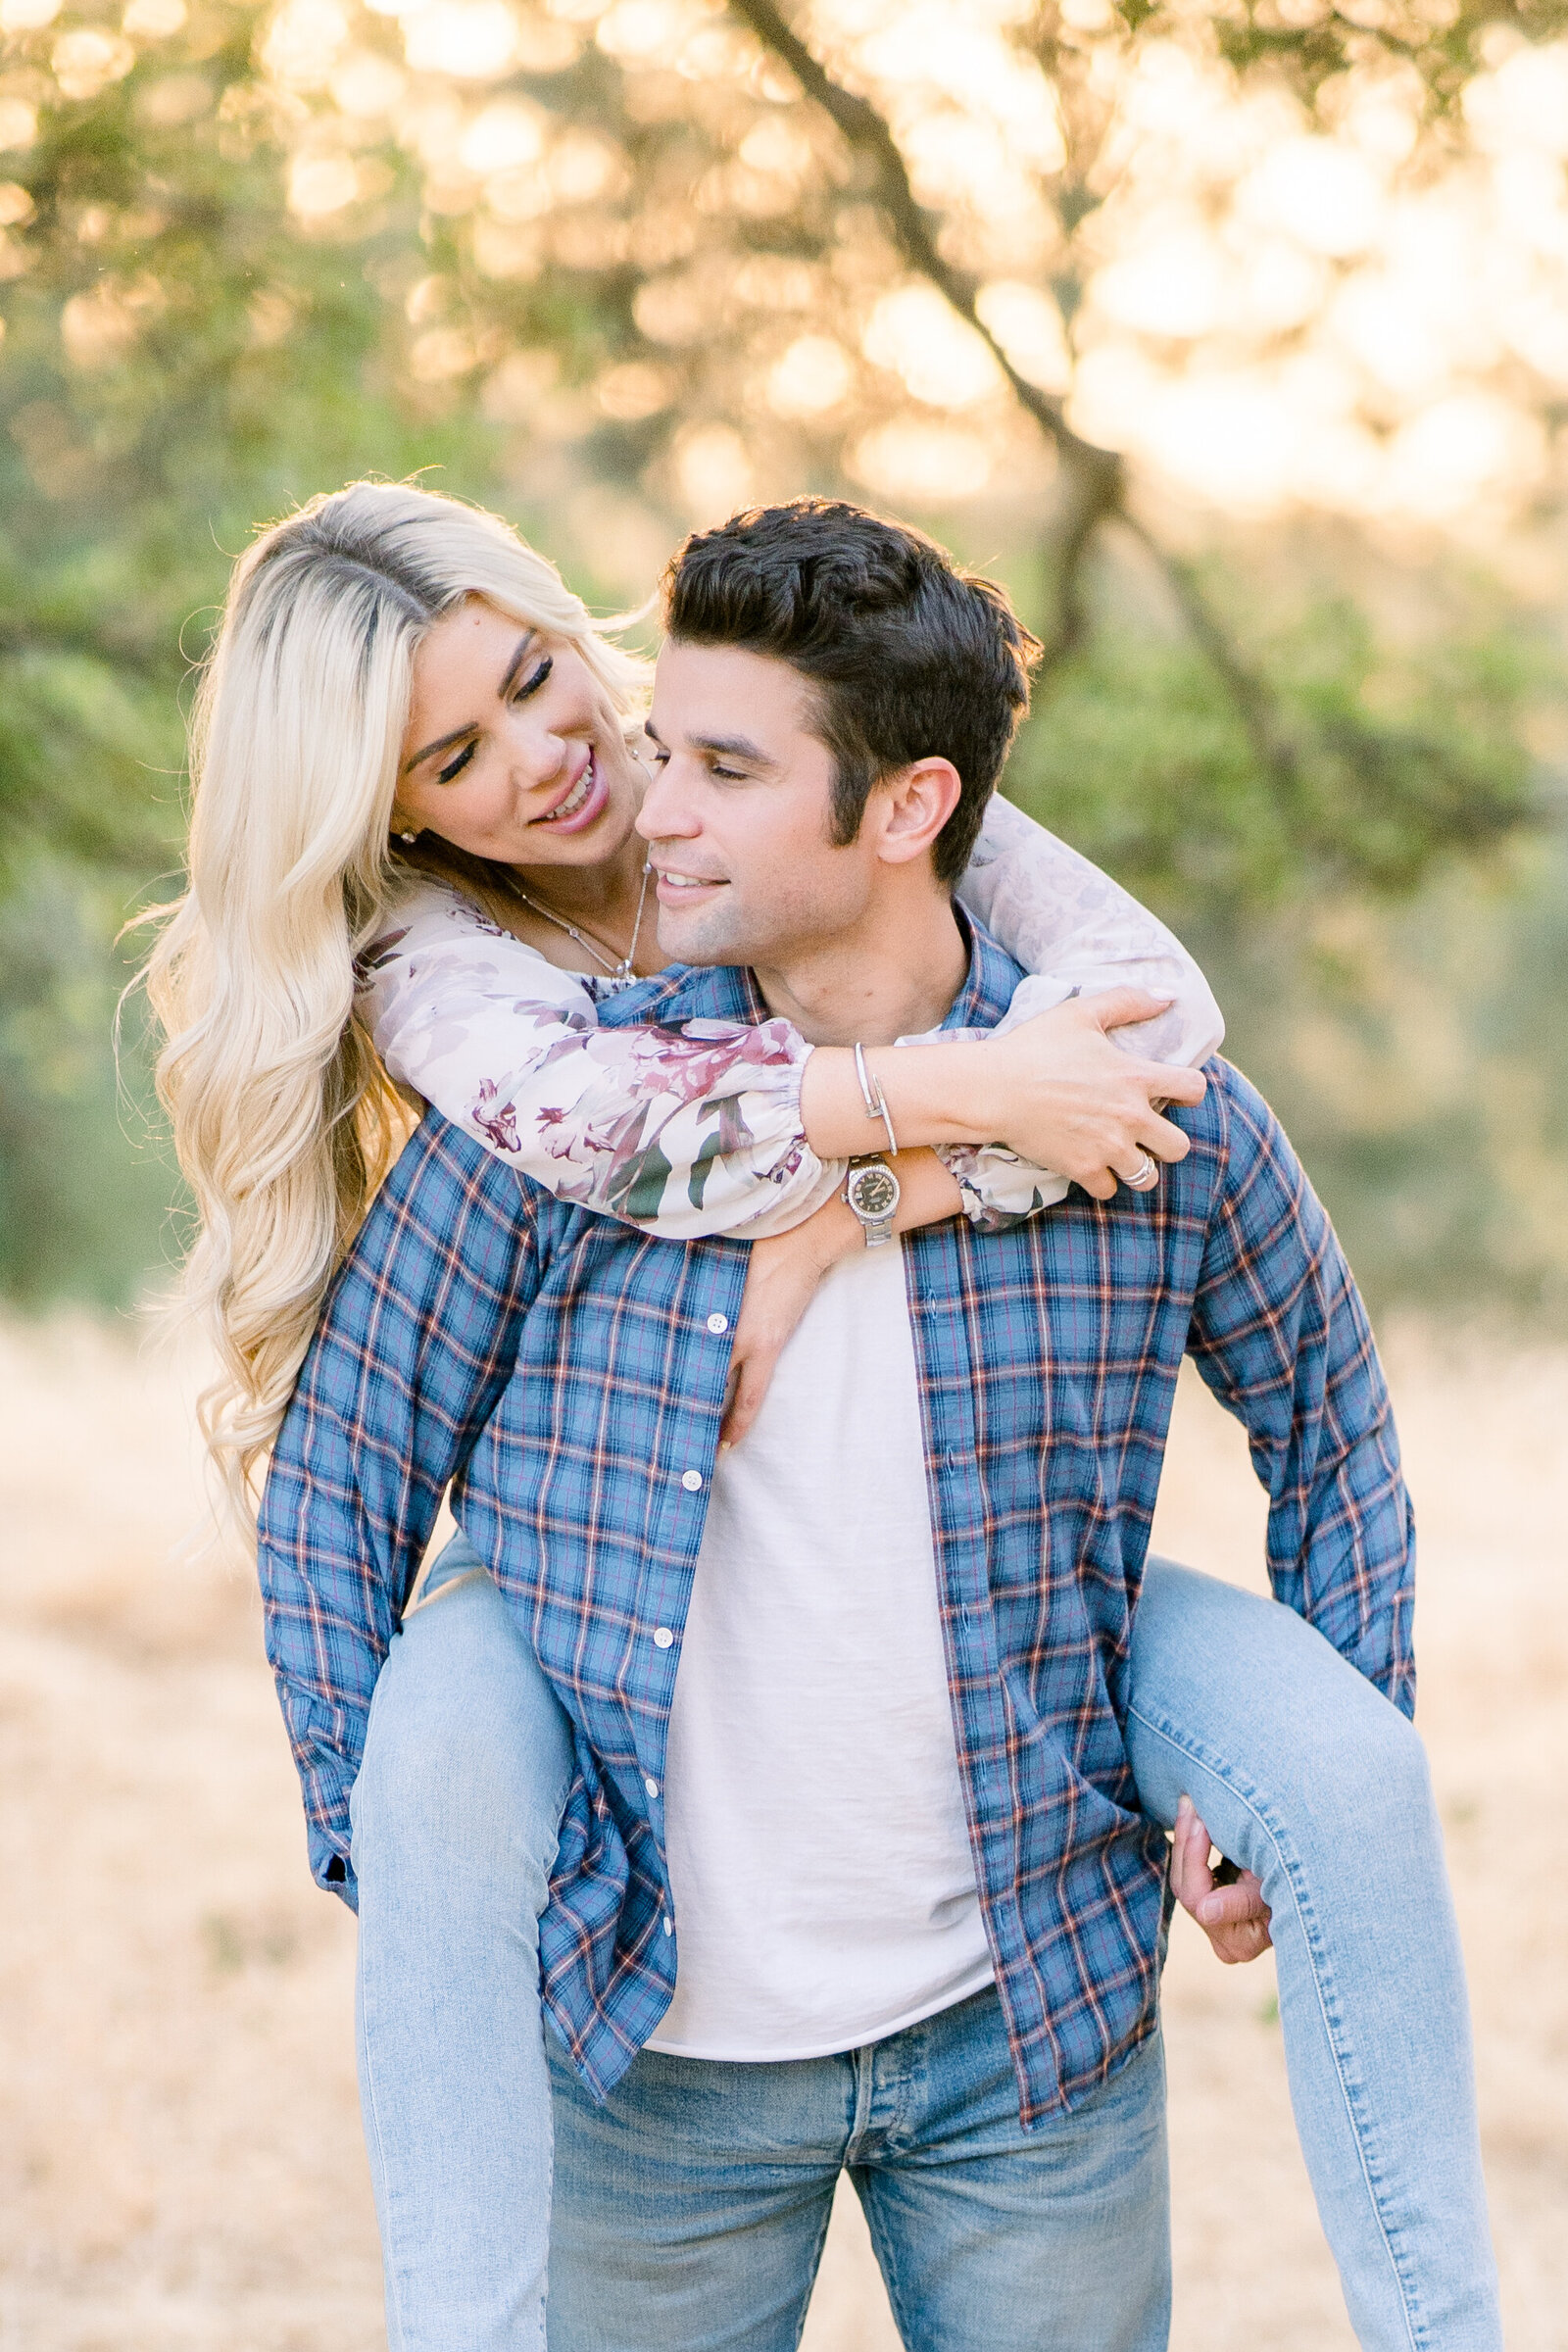 Couples engagement photos at Filoli in Woodside, CA